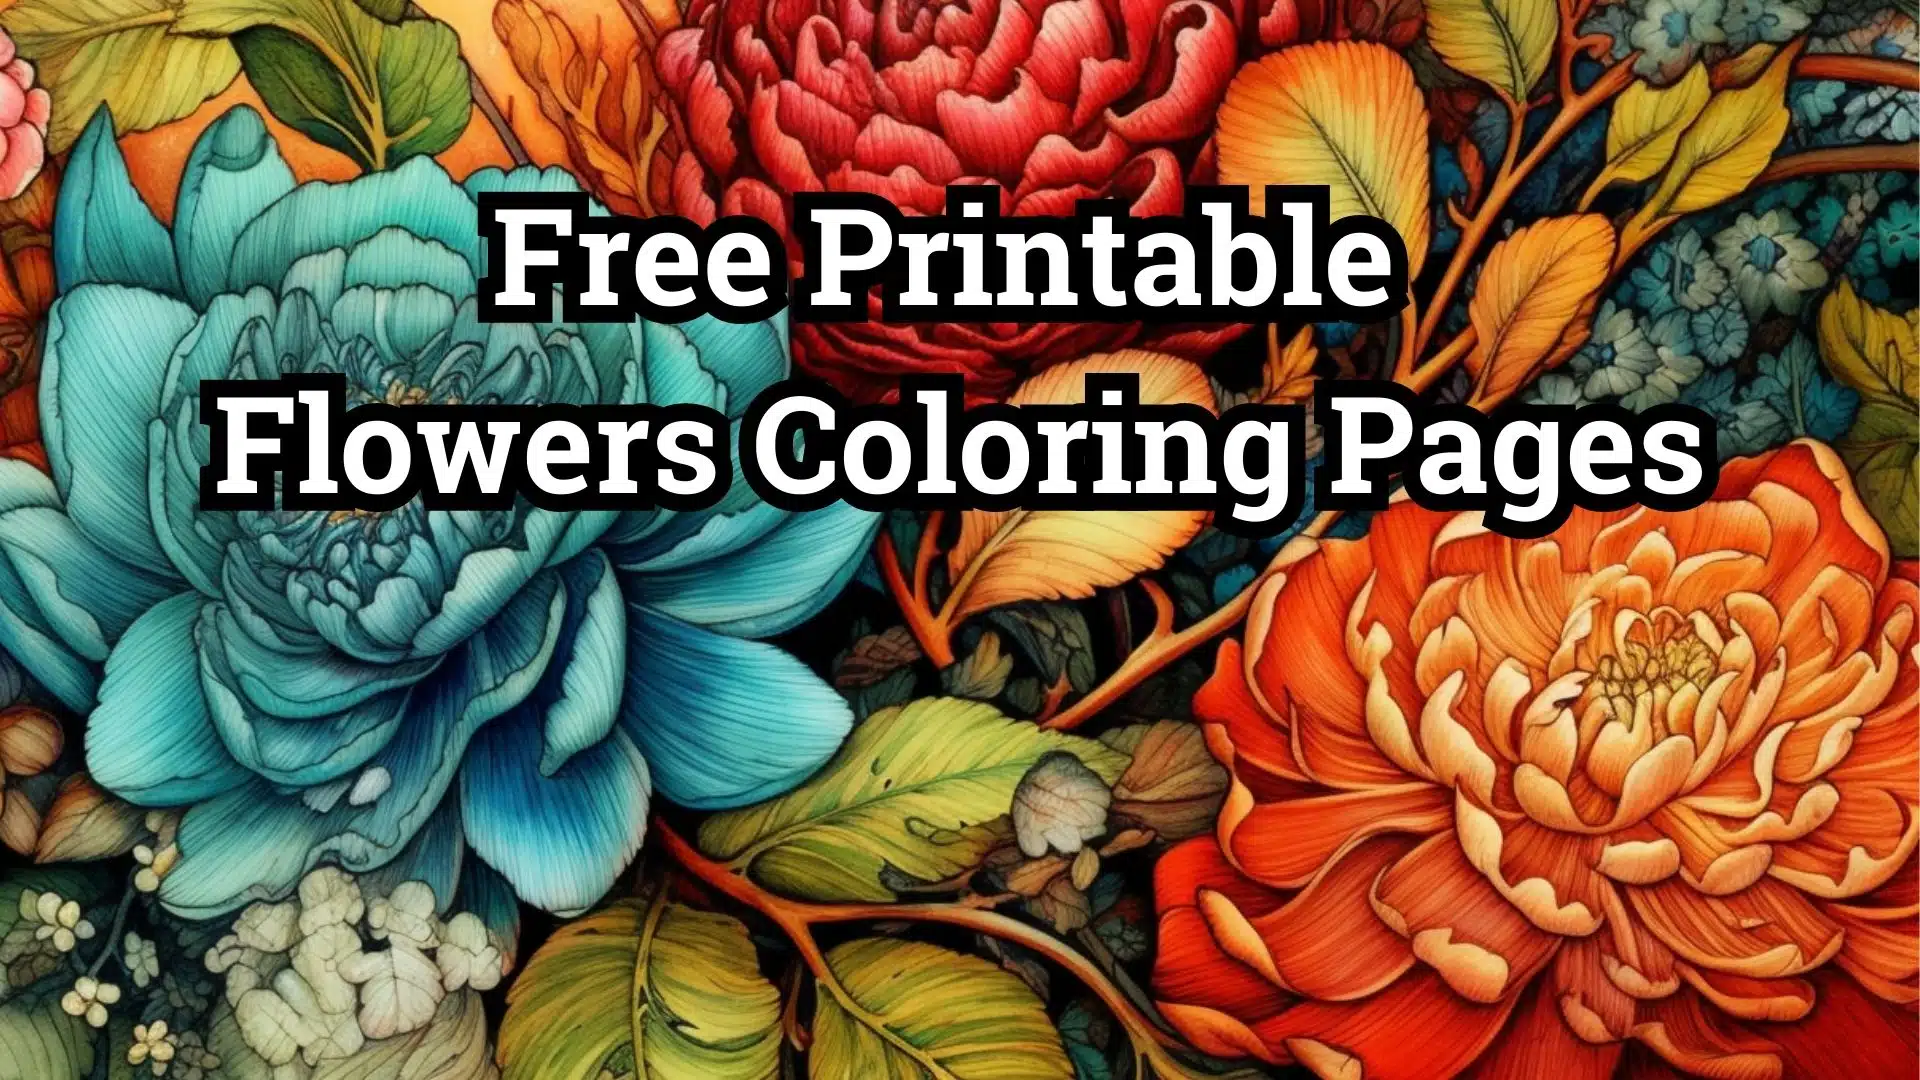 Free Printable Flowers Coloring Pages List